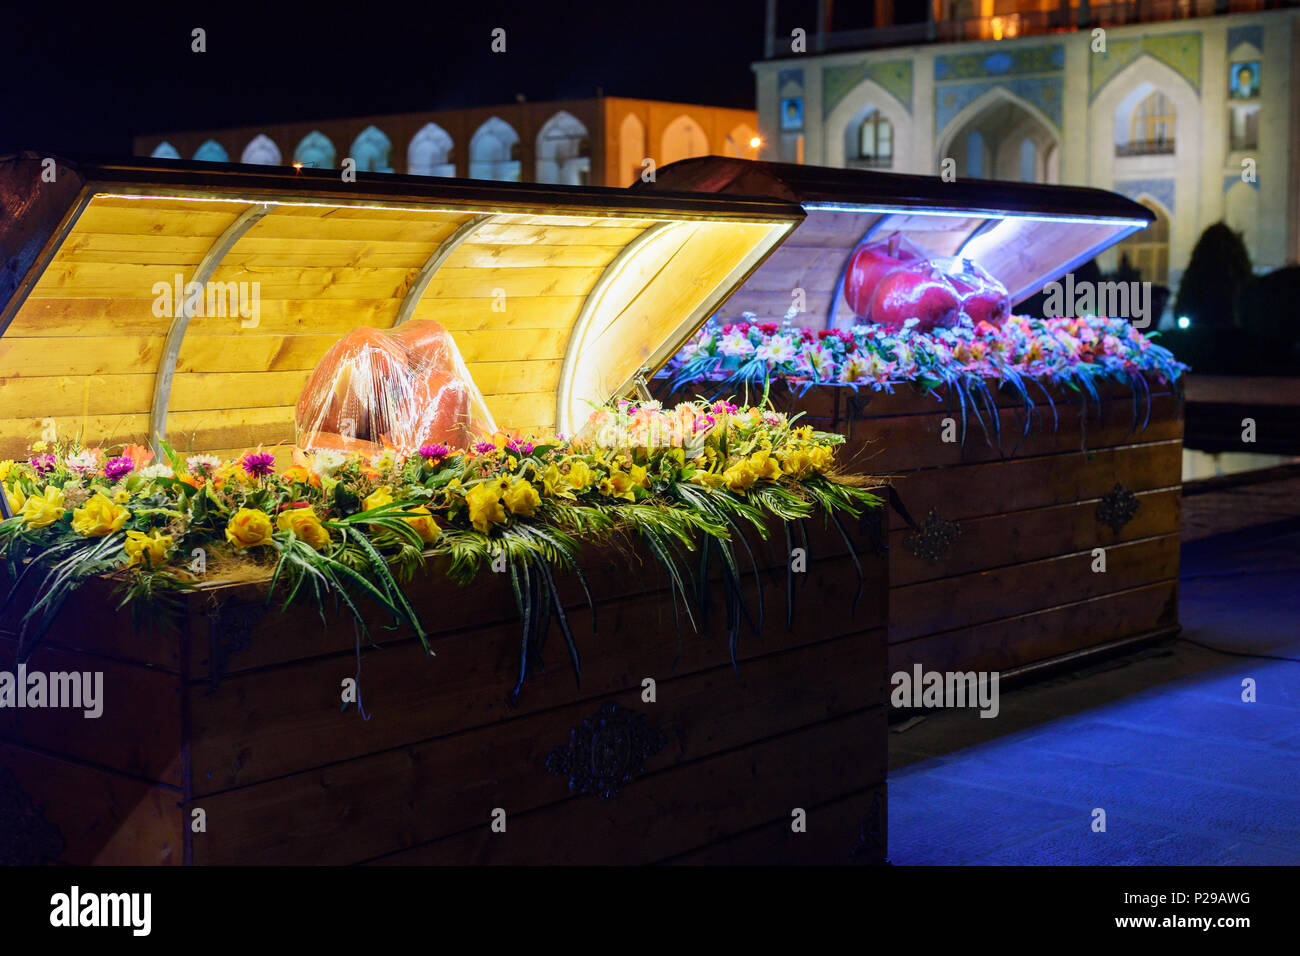 Isfahan, Iran - March 20, 2018: Nowruz decorations traditional Haft-seen on Naghsh-e Jahan Square at night Stock Photo